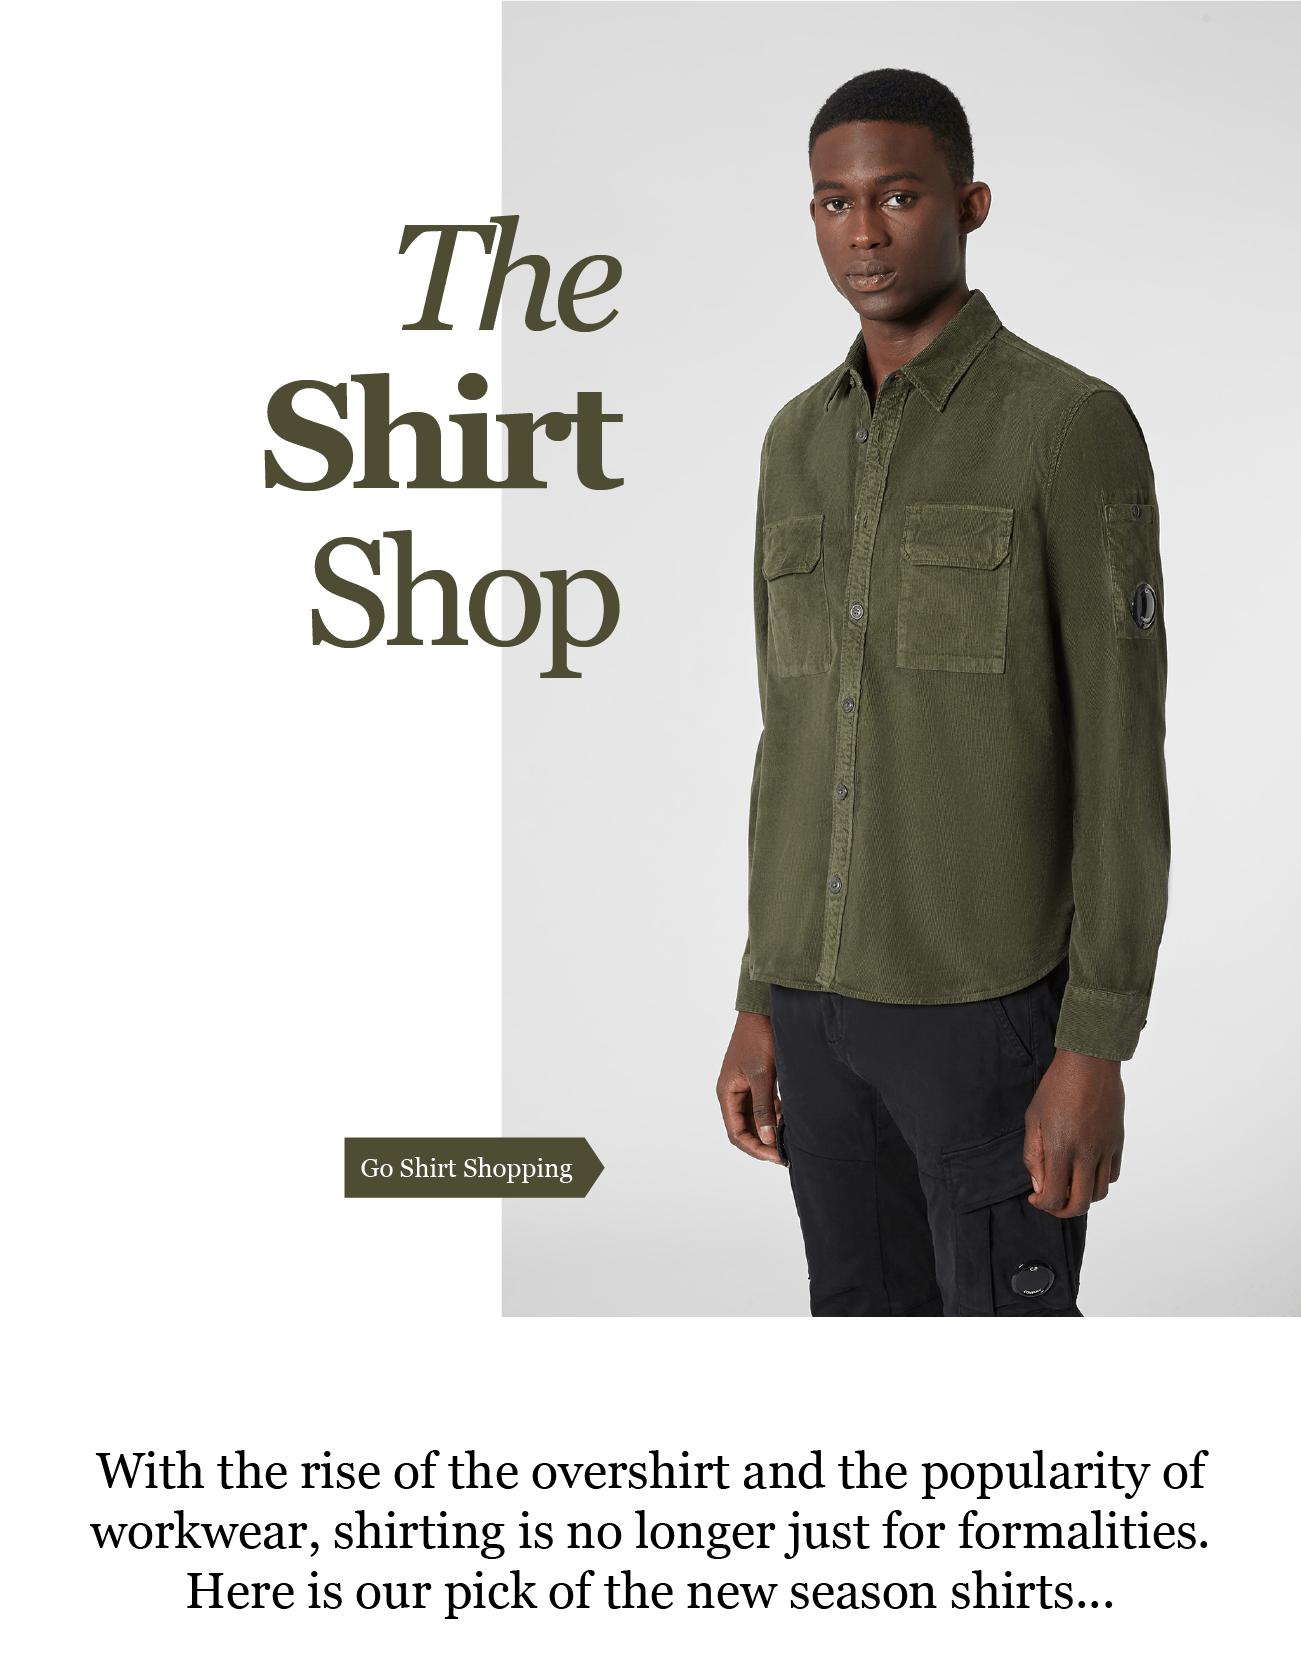 The
Shirt
Shop

Go Shirt Shopping

With the rise of the overshirt and the popularity of
workwear, shirting is no longer just for formalities.
Here is our pick of the new season shirts...

